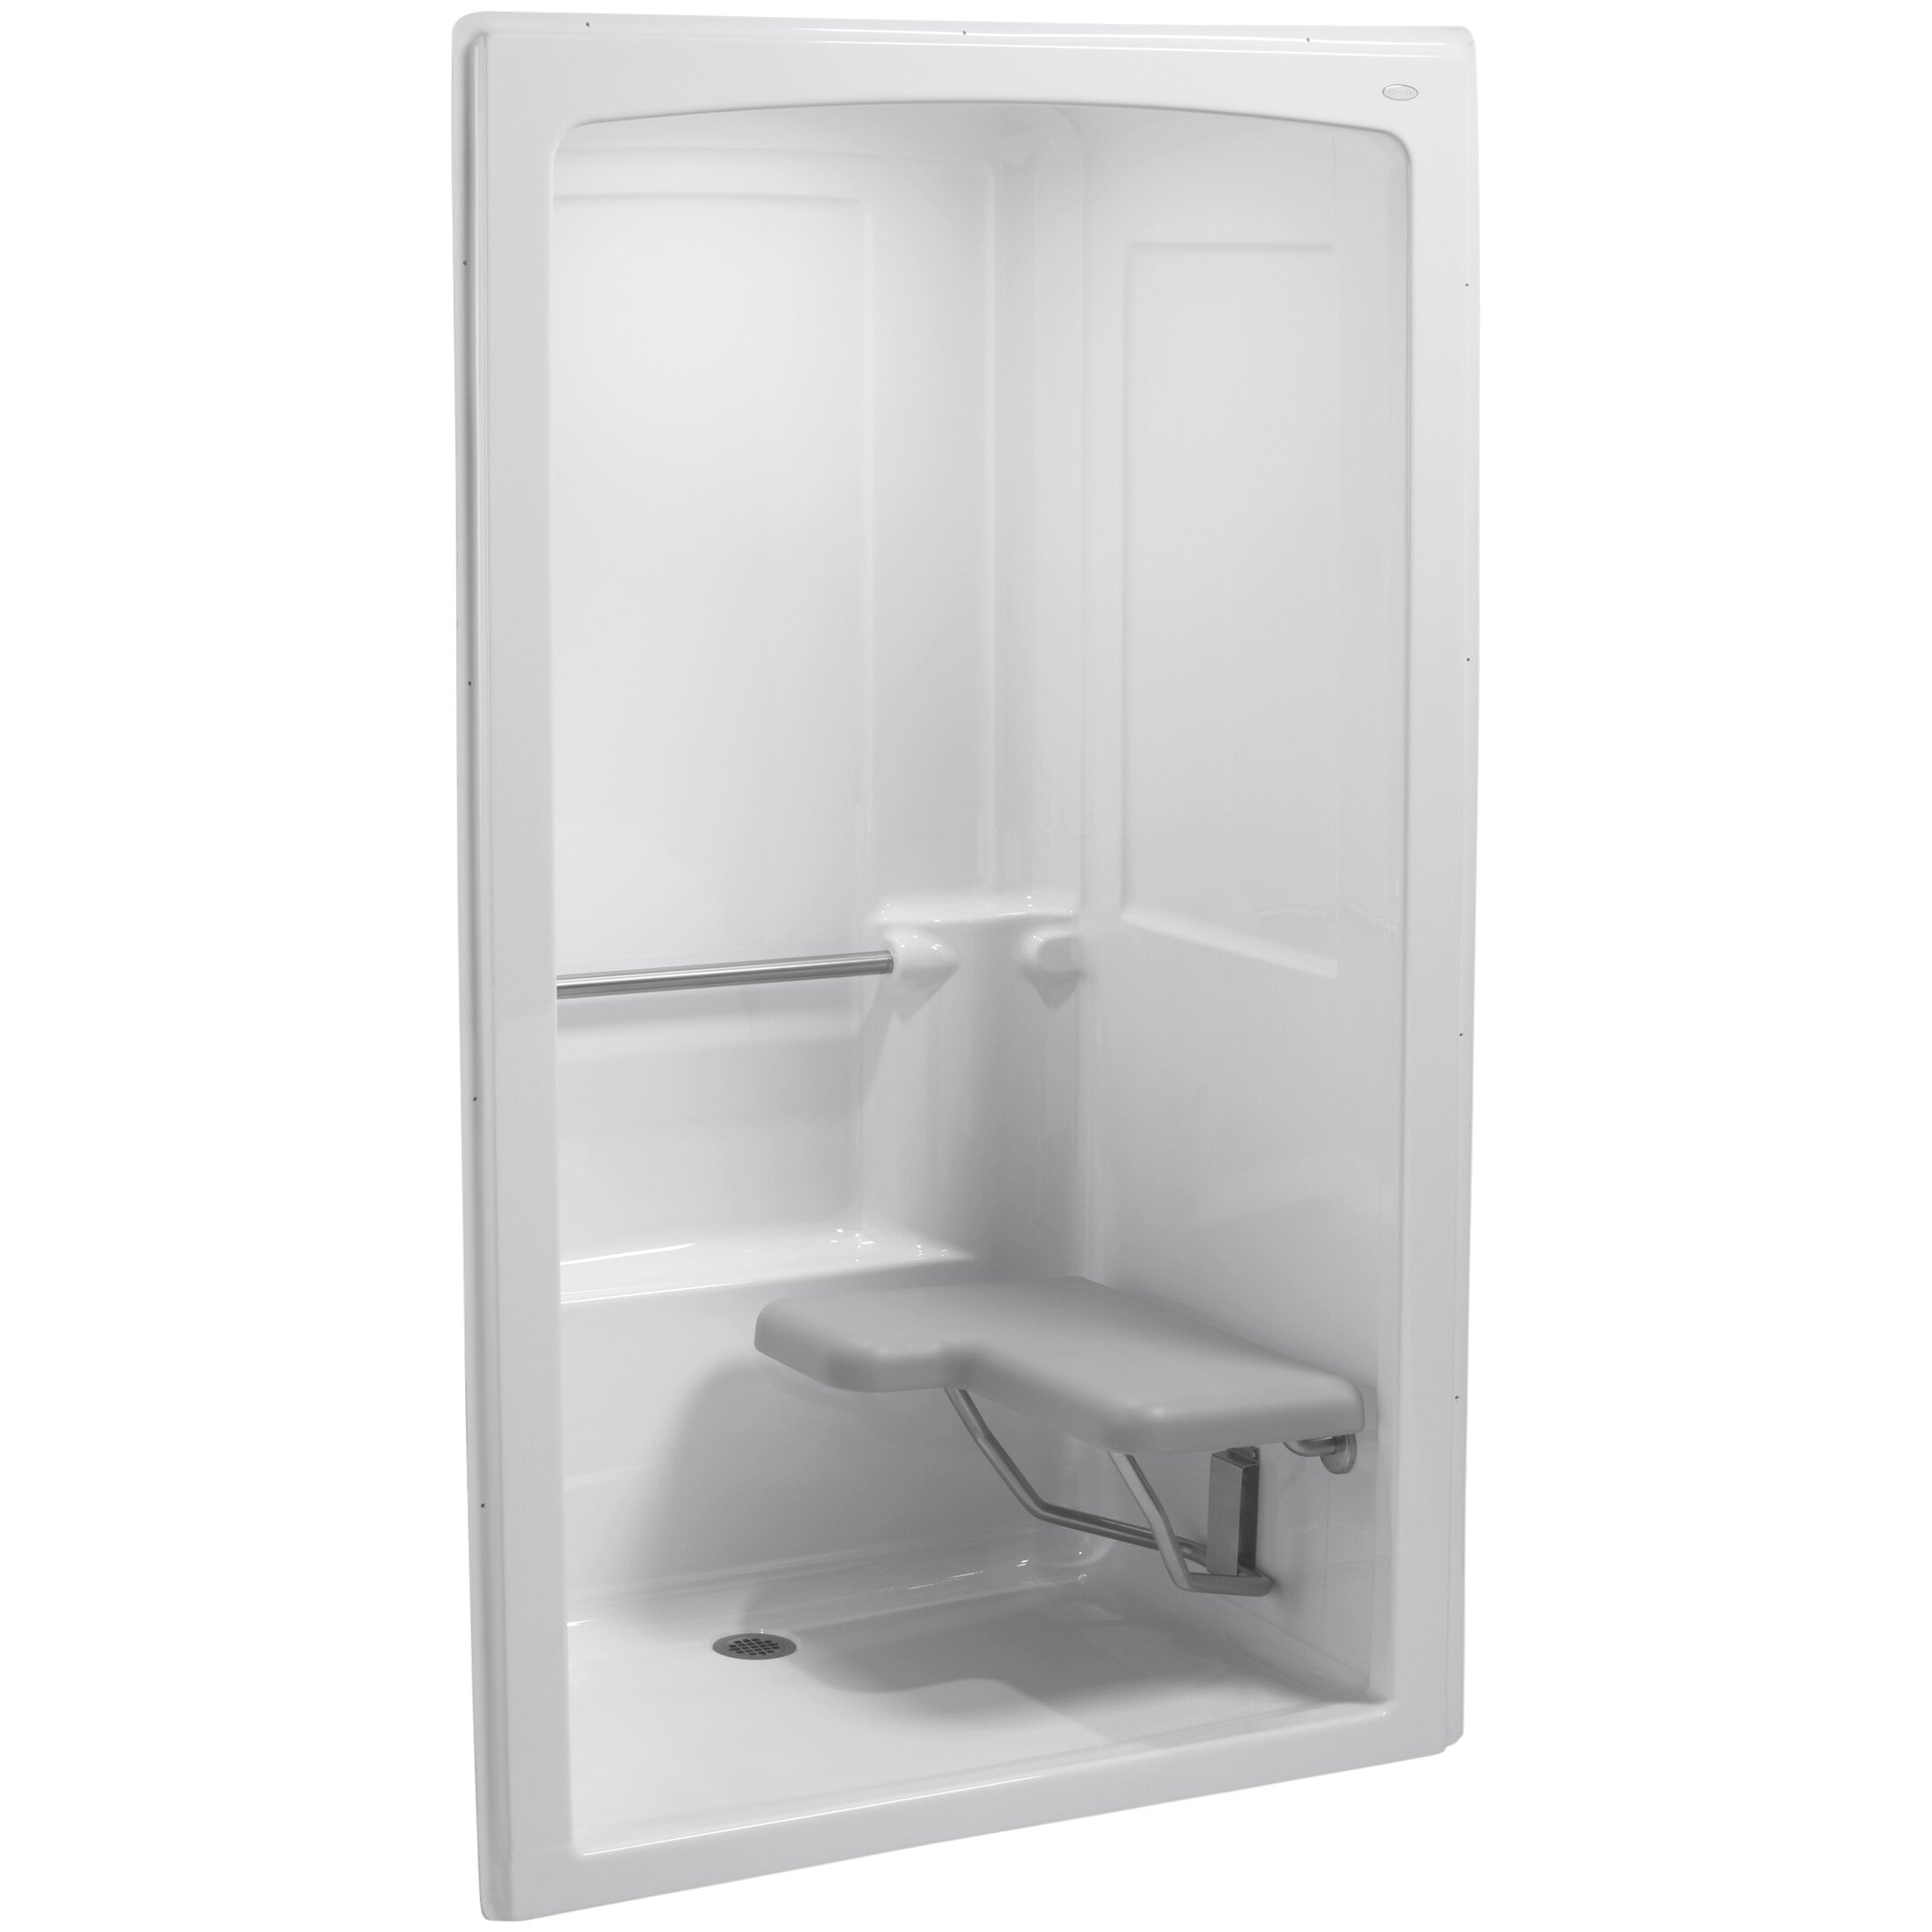 Kohler Freewill 52 X 38 1 2 X 84 Barrier Free Shower Stall With Brushed Stainless Steel Grab Bars And Seat At Right K 12112 C 